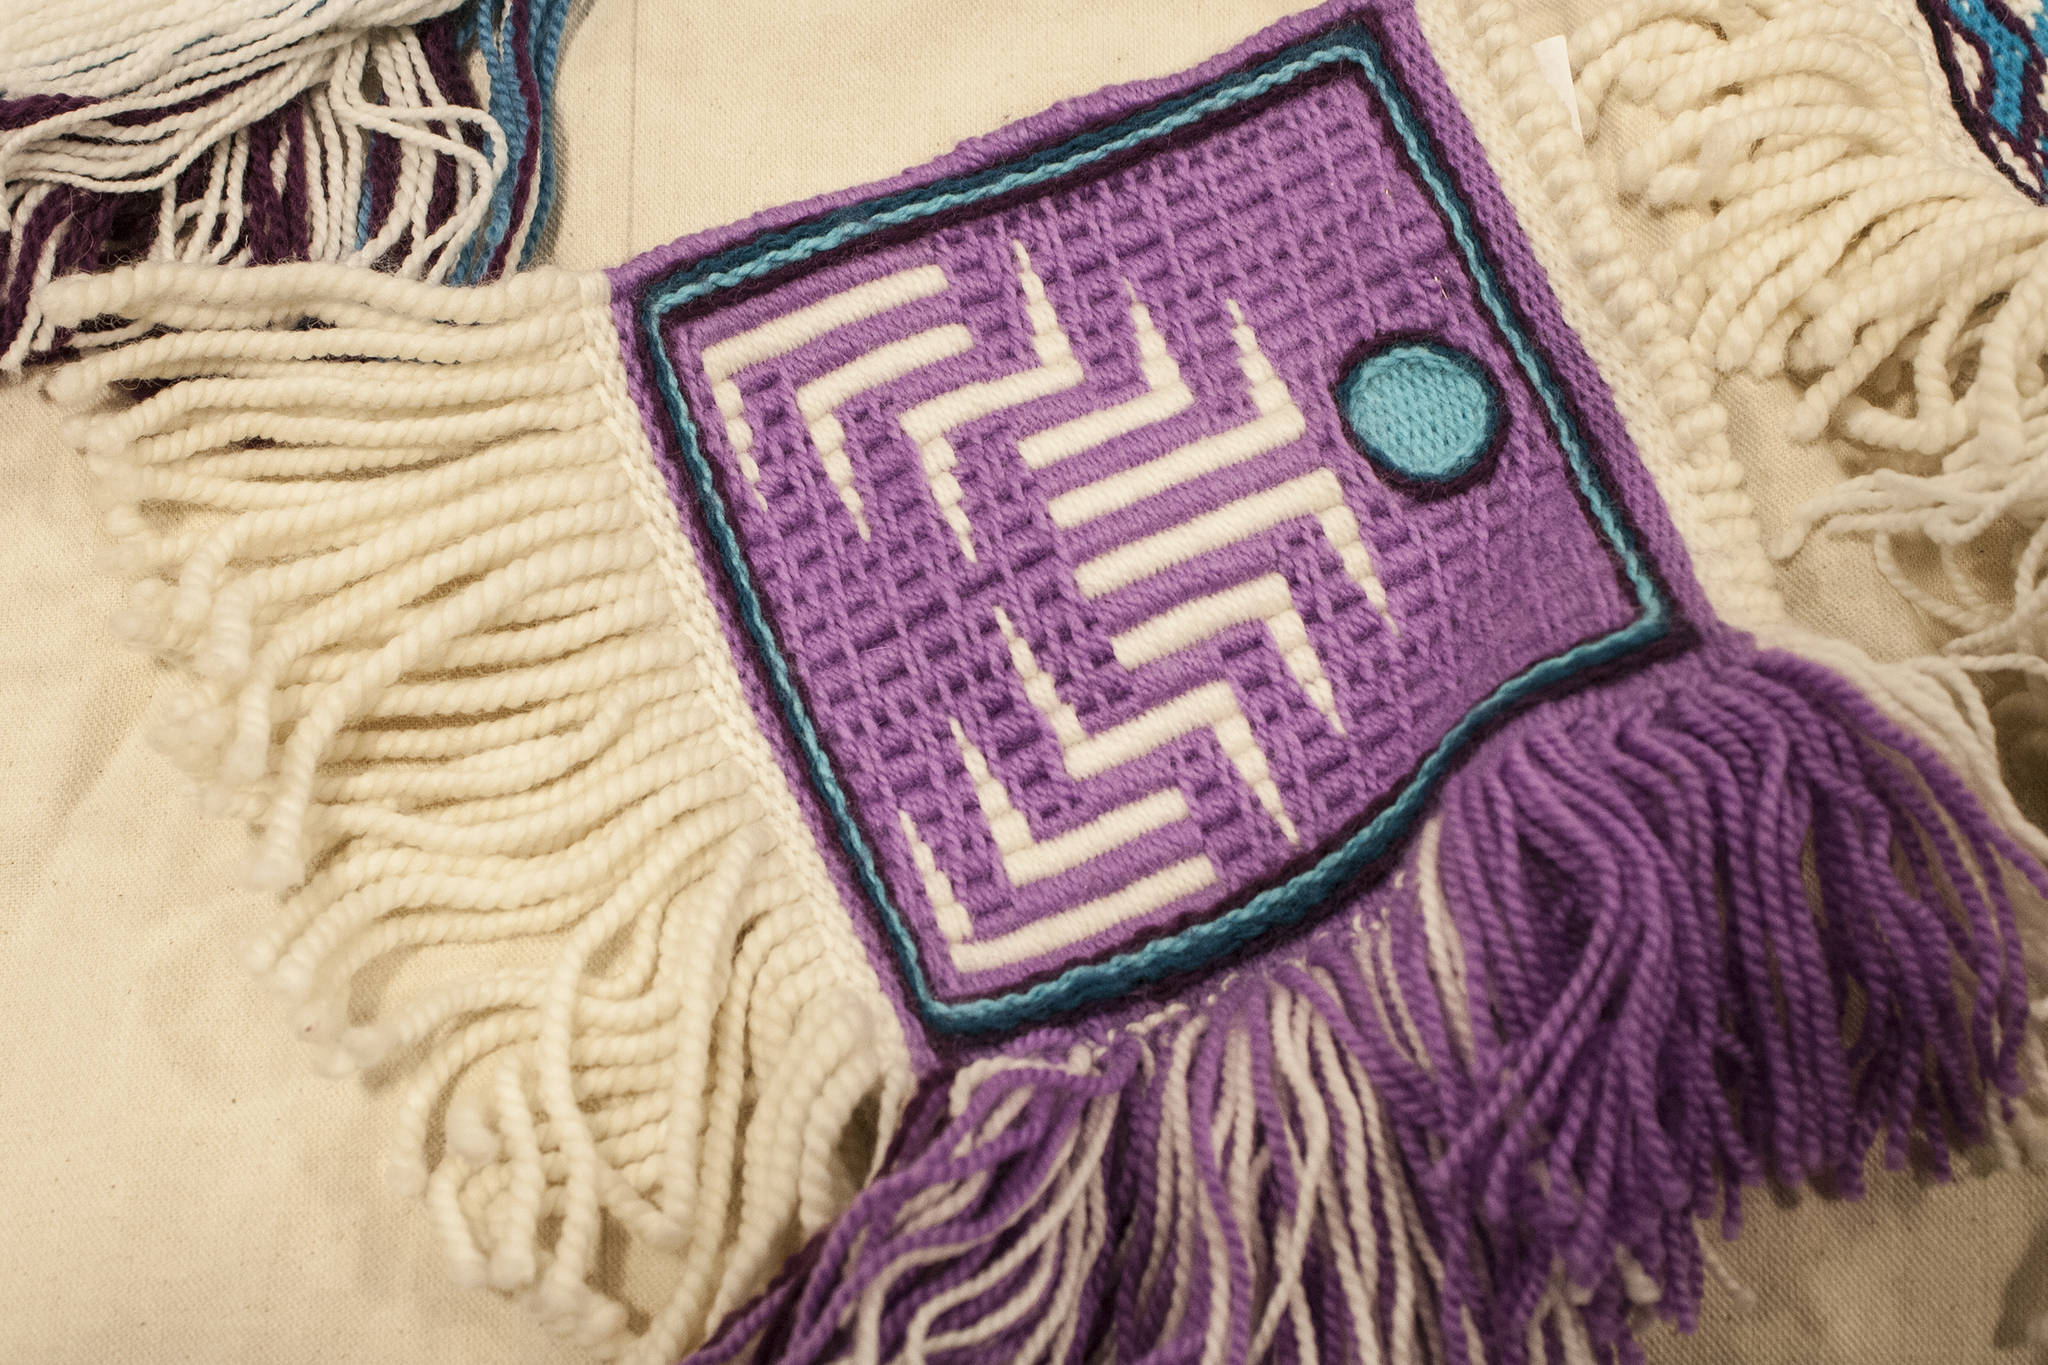 This square was woven by Patty Fiorella for the Giving Strength Robe. (Ben Hohenstatt | Capital City Weekly)